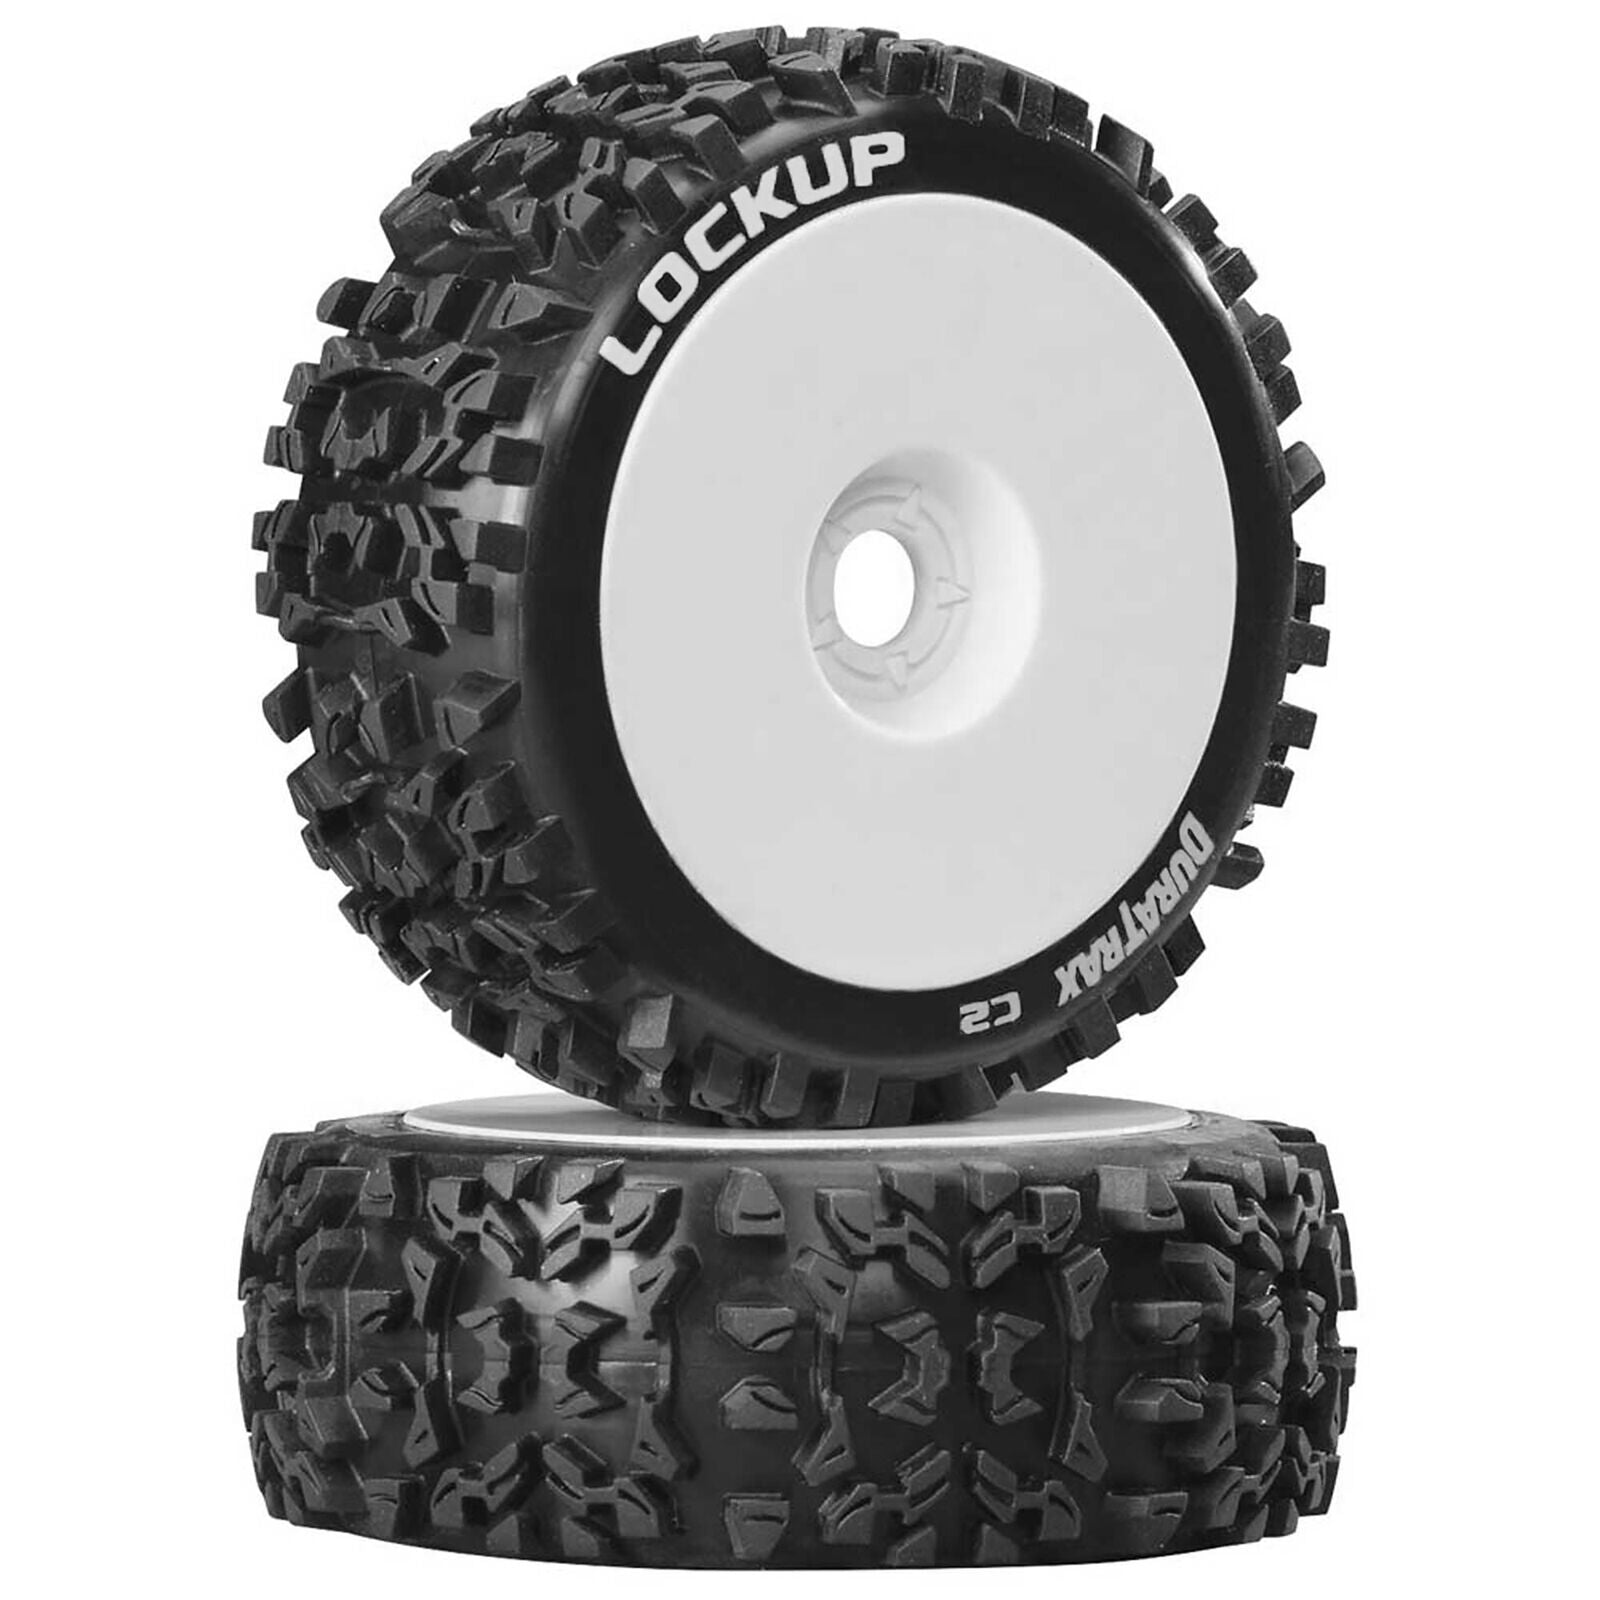 DURATRAX DTXC3615 Lockup 1/8 C2 Mounted Buggy Tires, White (2)